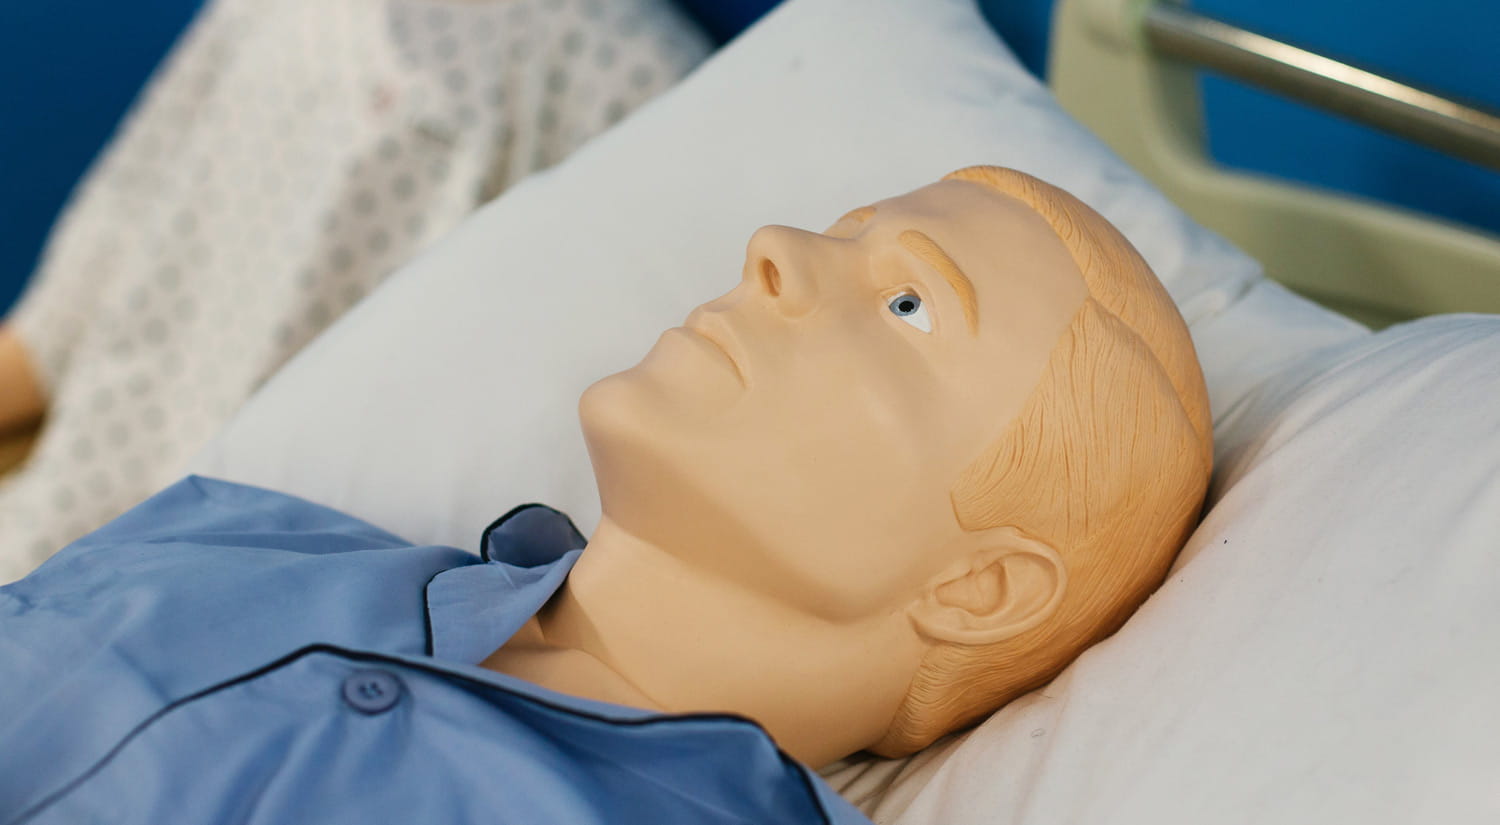 The patients can simulate illnesses from infections to heart attacks